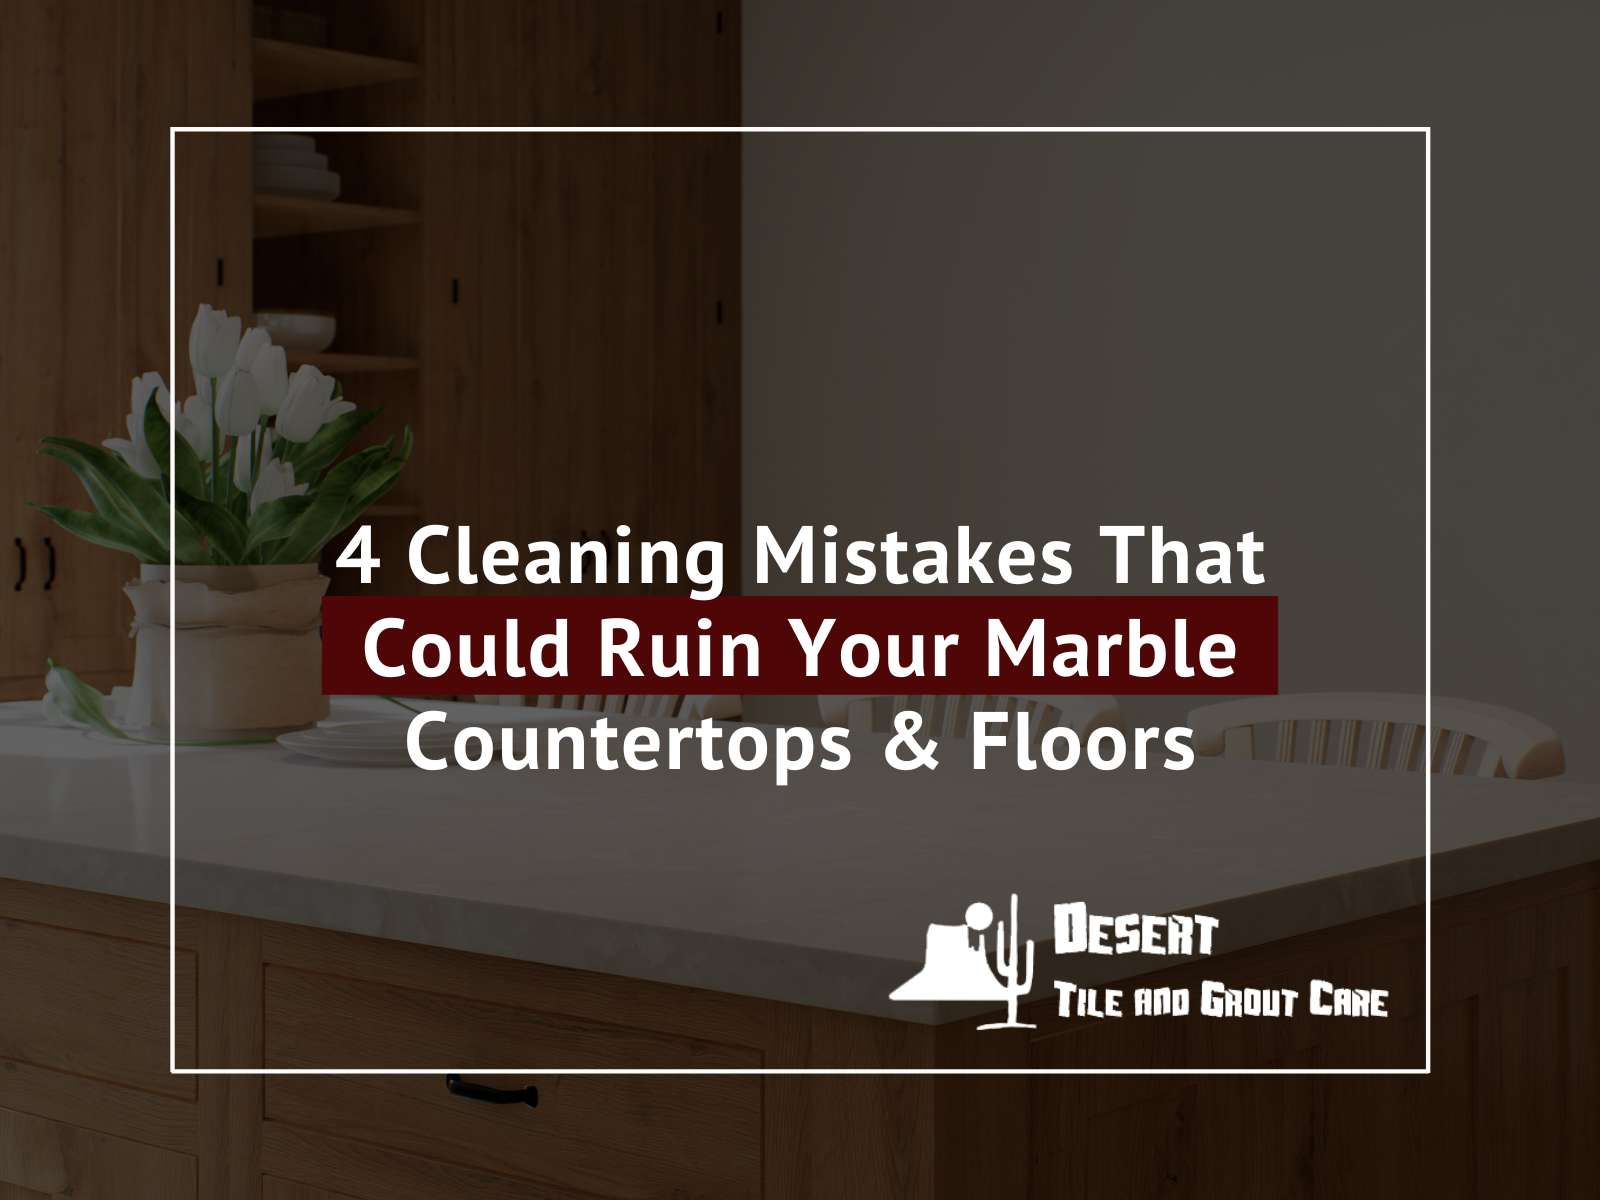 4 Cleaning Mistakes That Could Ruin Your Marble Countertops & Floors